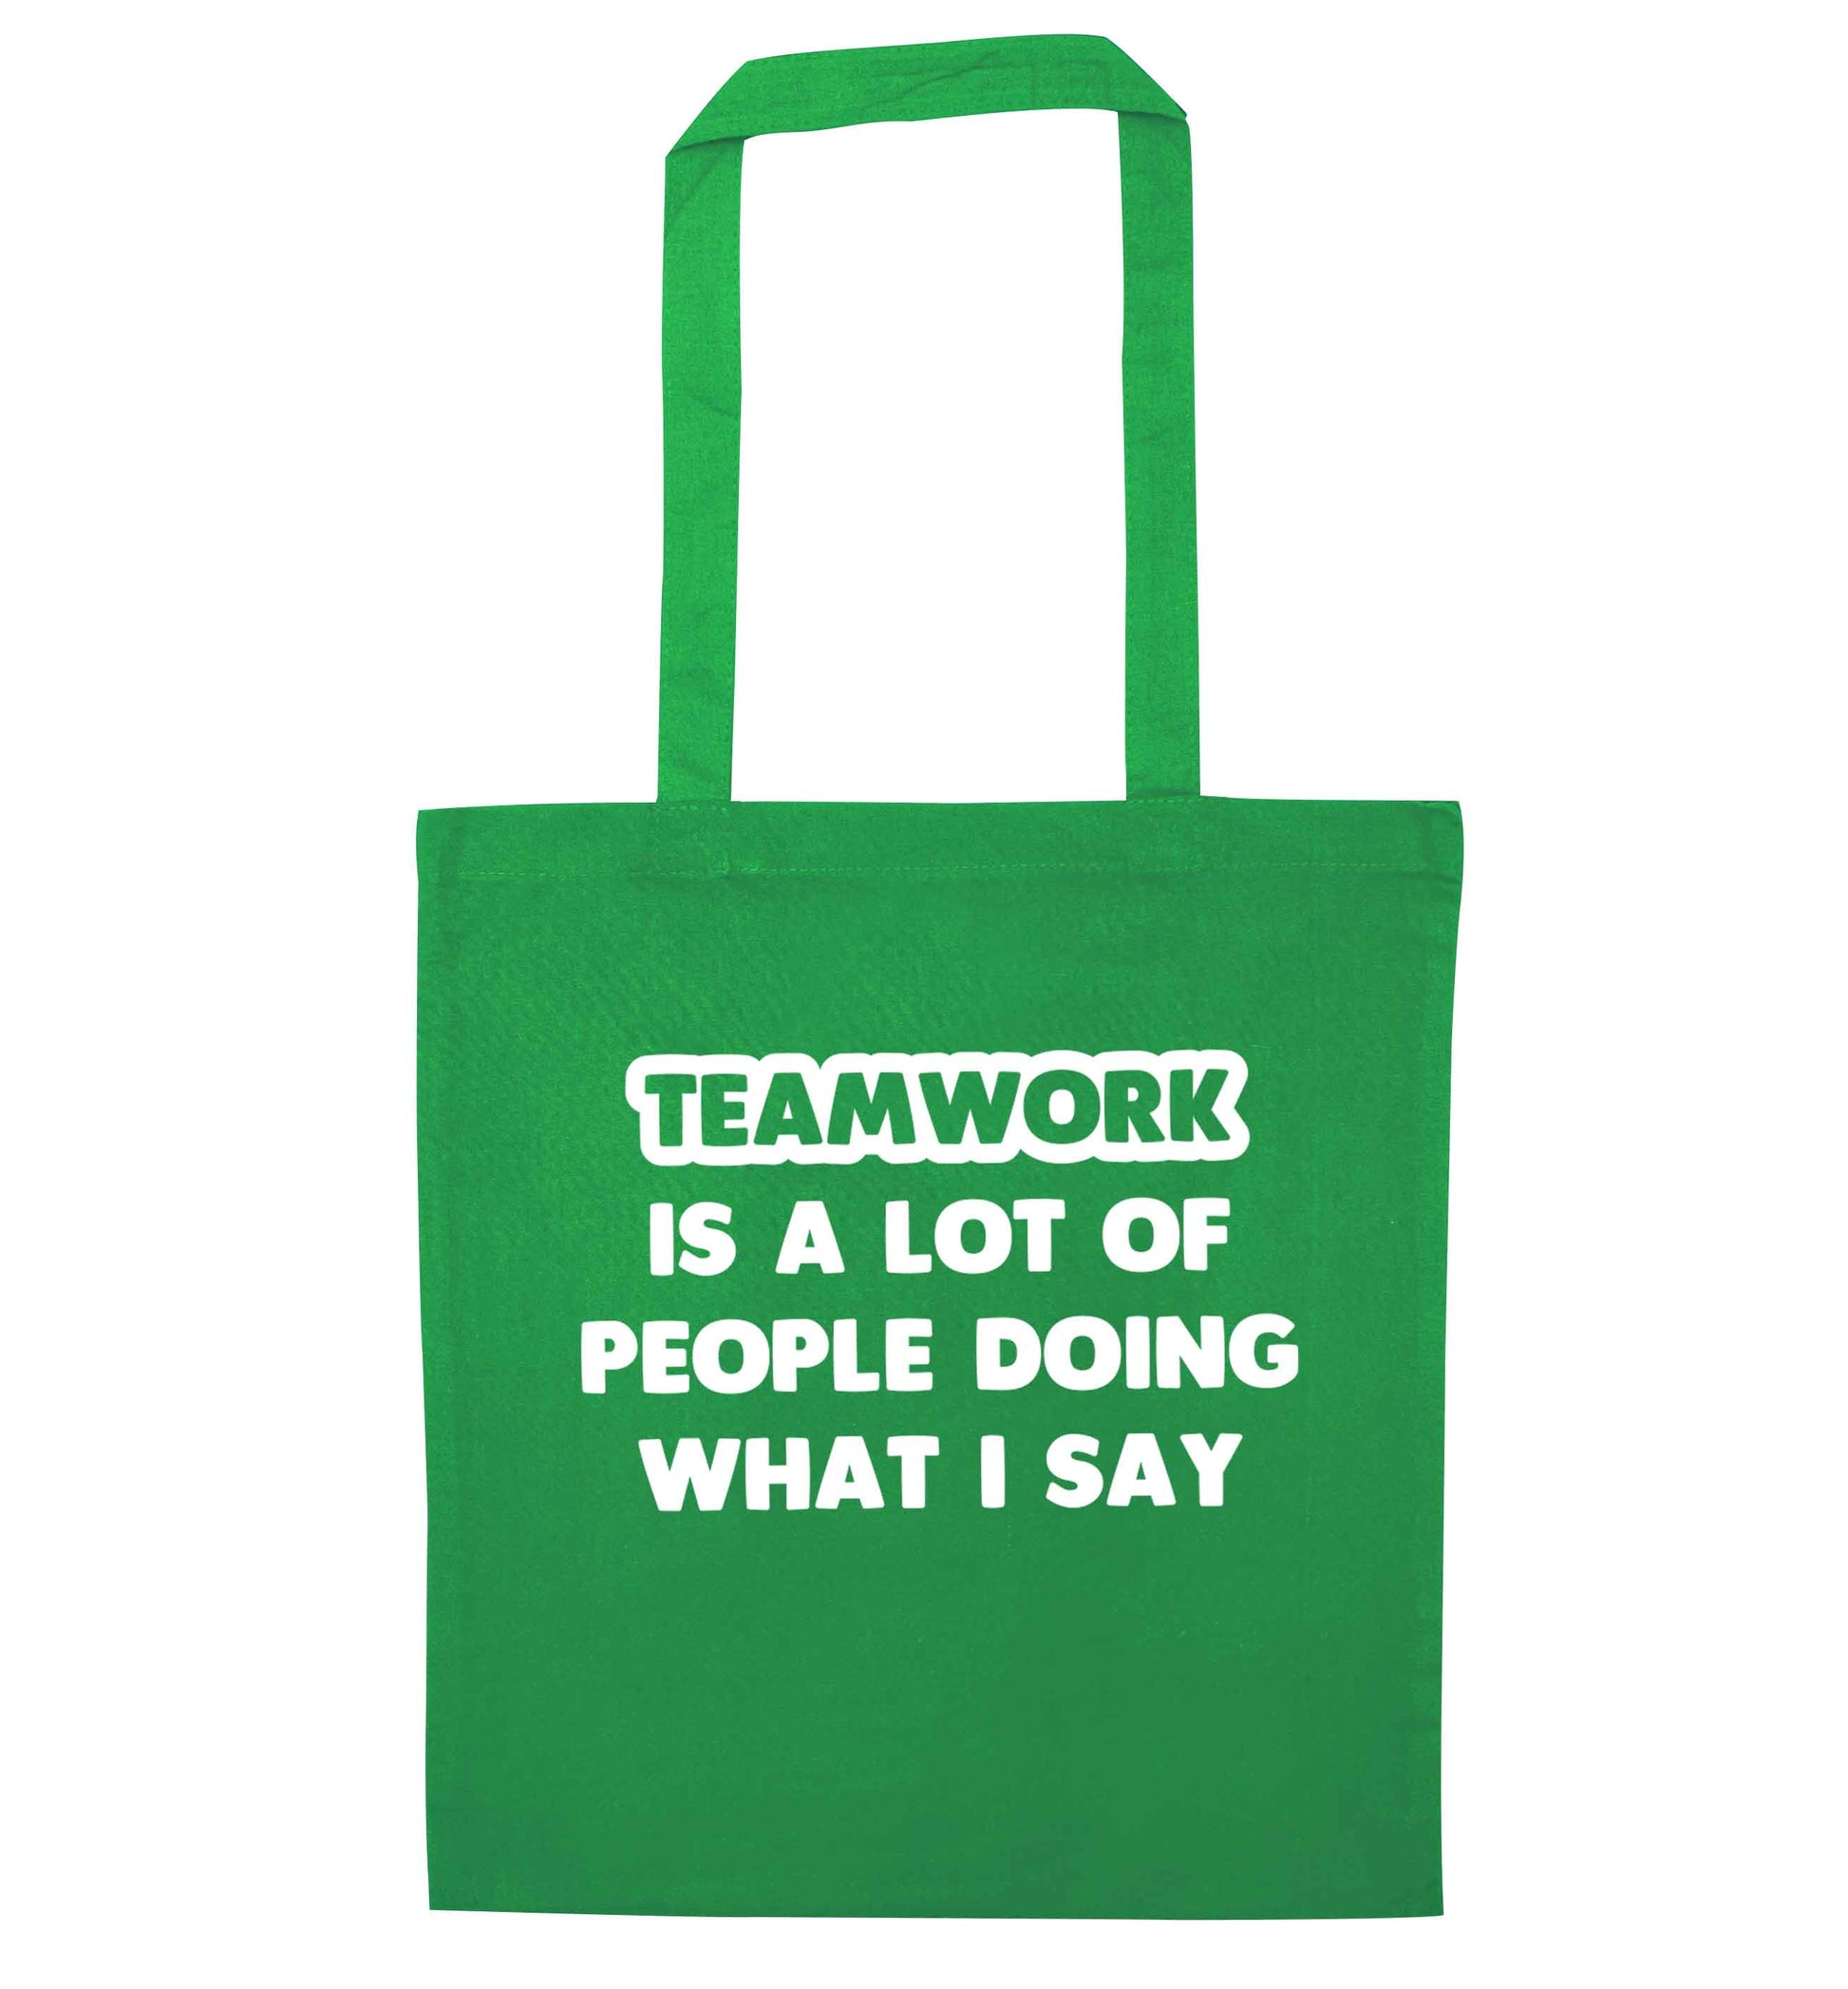 Teamwork is a lot of people doing what I say green tote bag